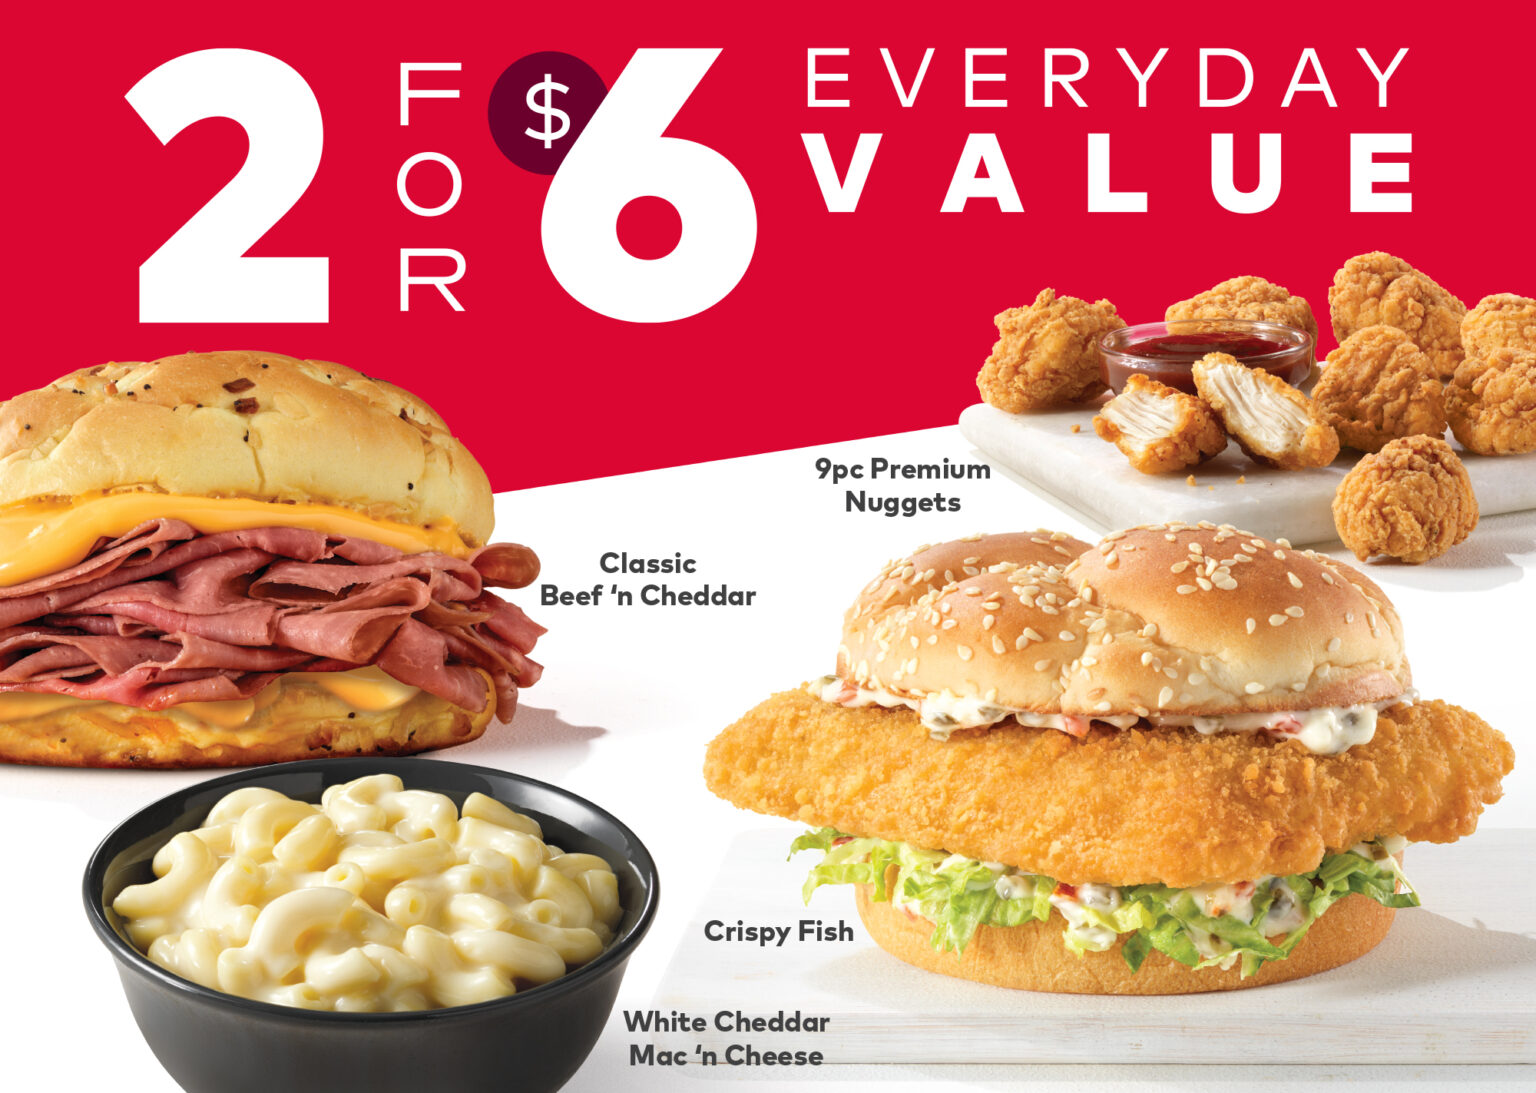 Arby’s 2 for 6 Everyday Value (for a limited time)